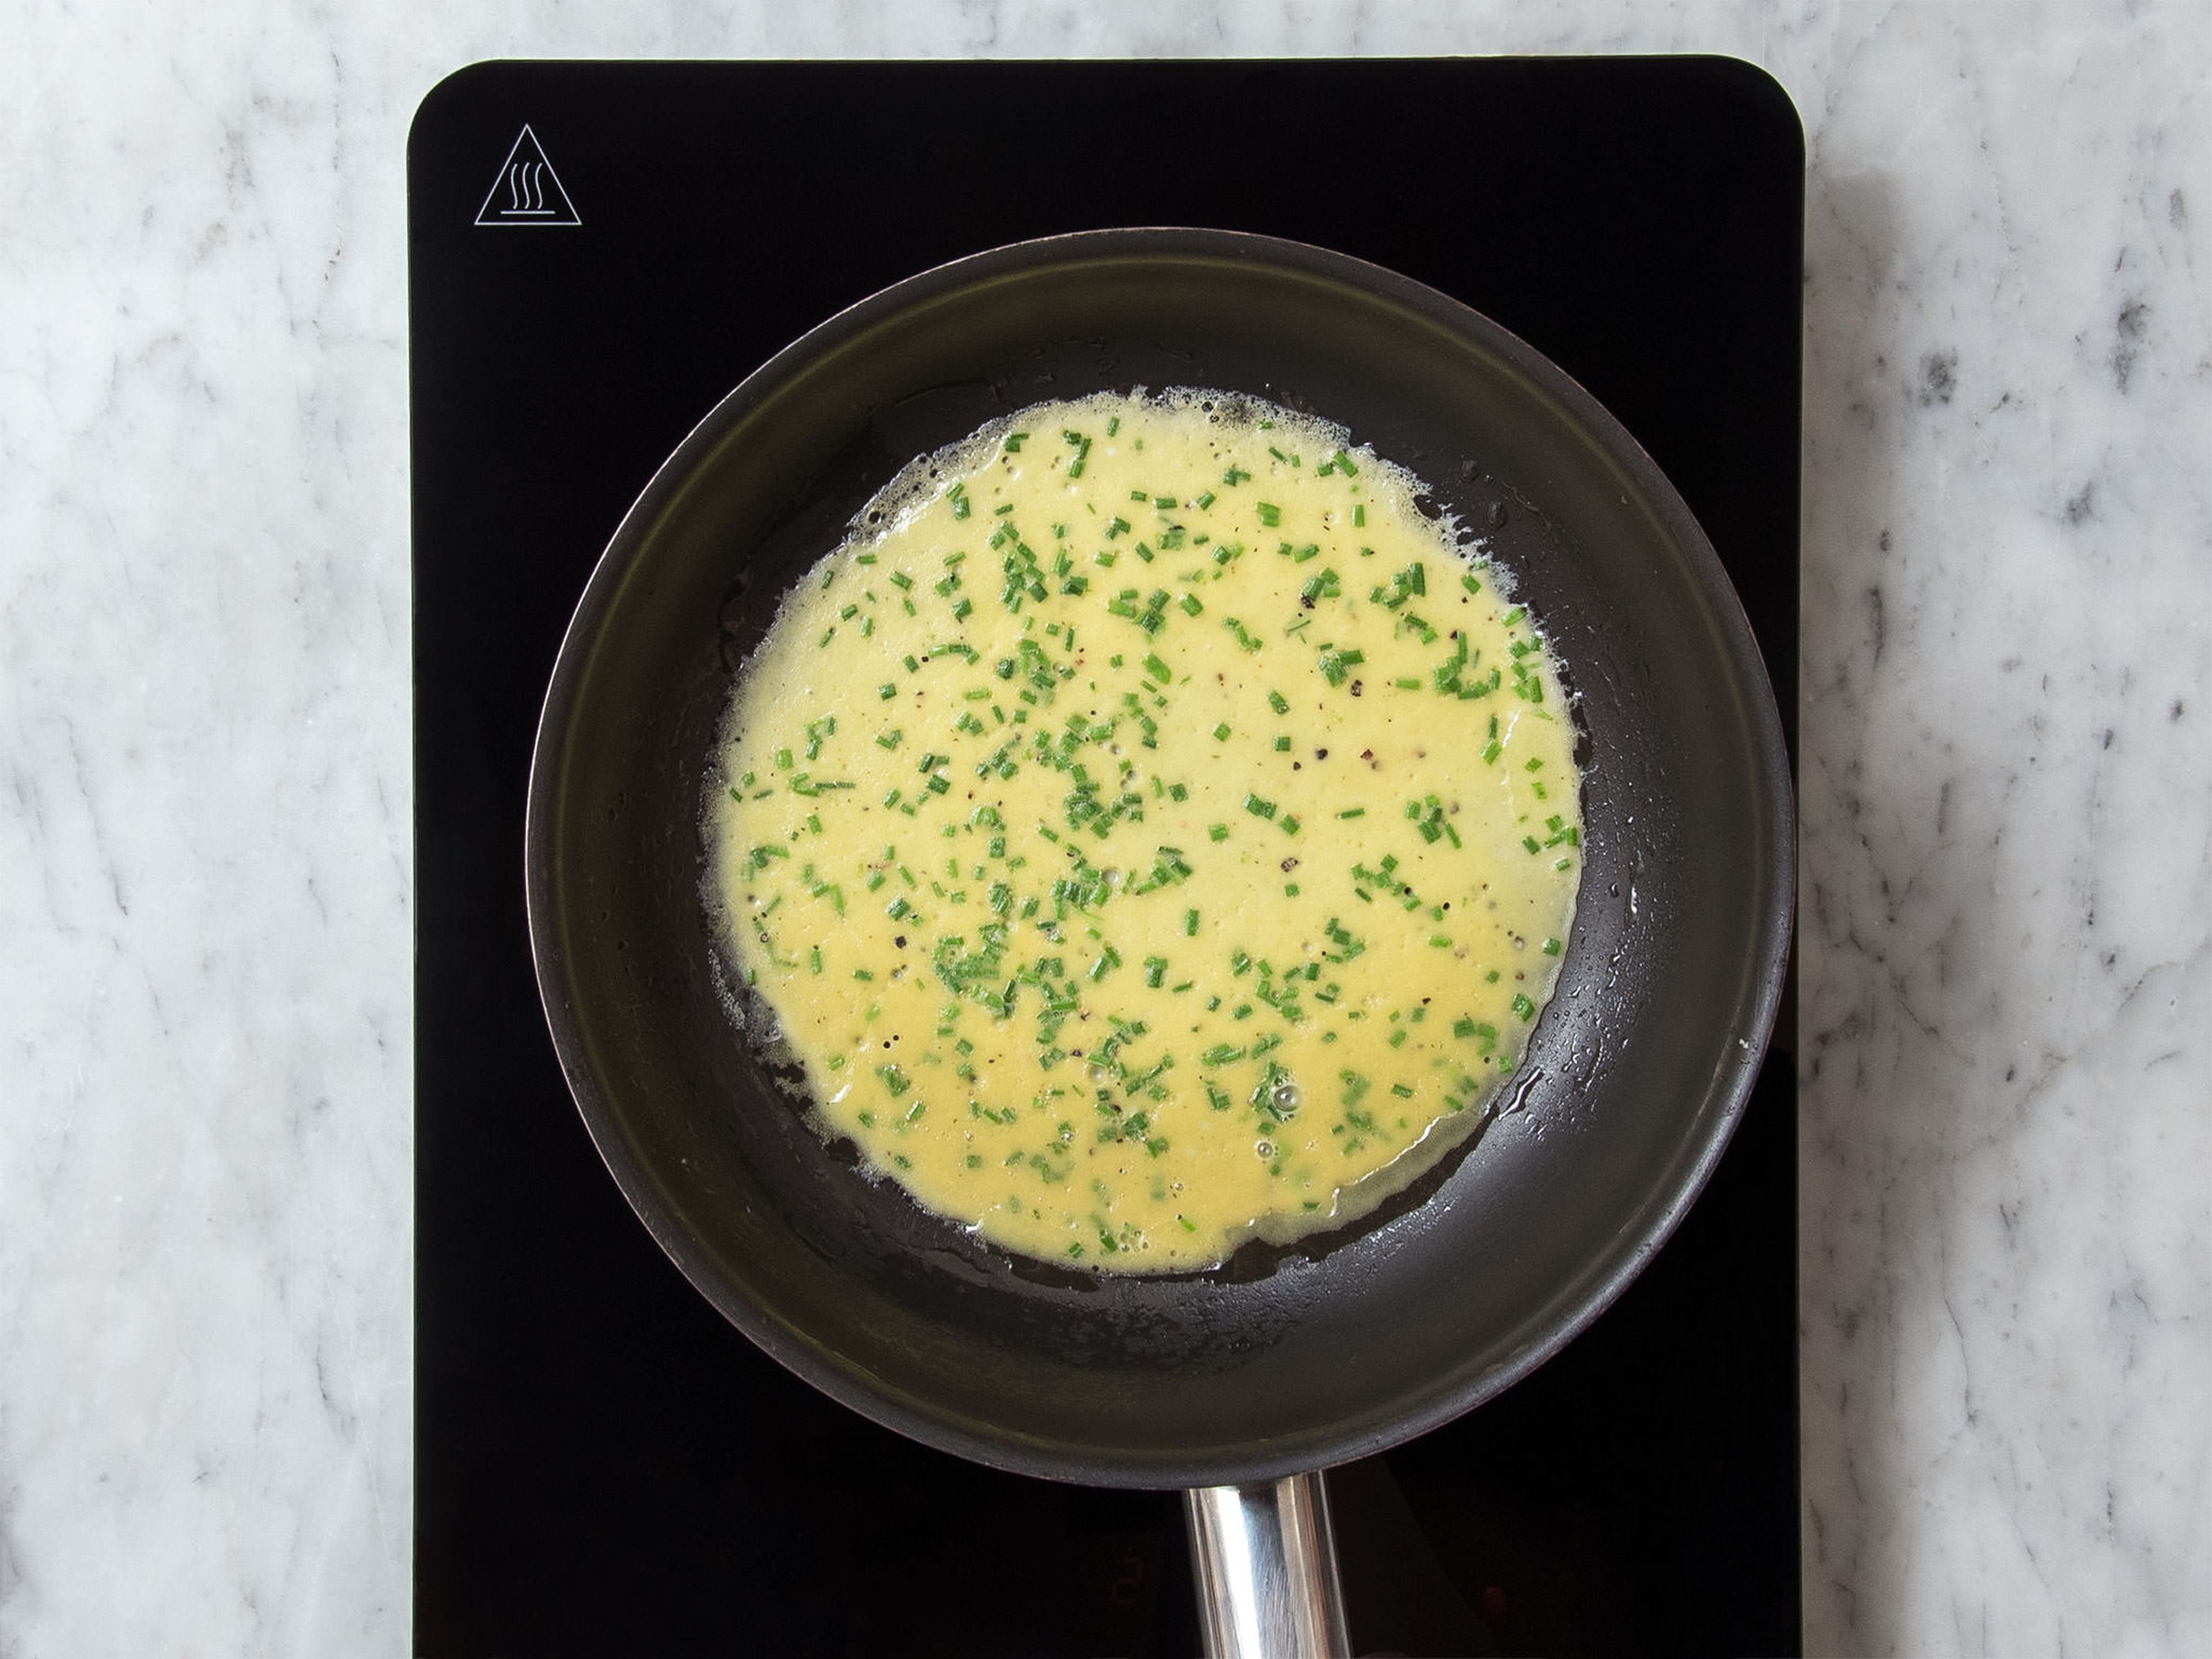 Heat vegetable oil in a nonstick pan over medium heat. Add half of the egg mixture and fry for approx. 2 – 3 min. until the egg is cooked. Flip the omelette and keep frying for approx.  1 min. Remove the omelette from the pan, then repeat with the remaining egg mixture.